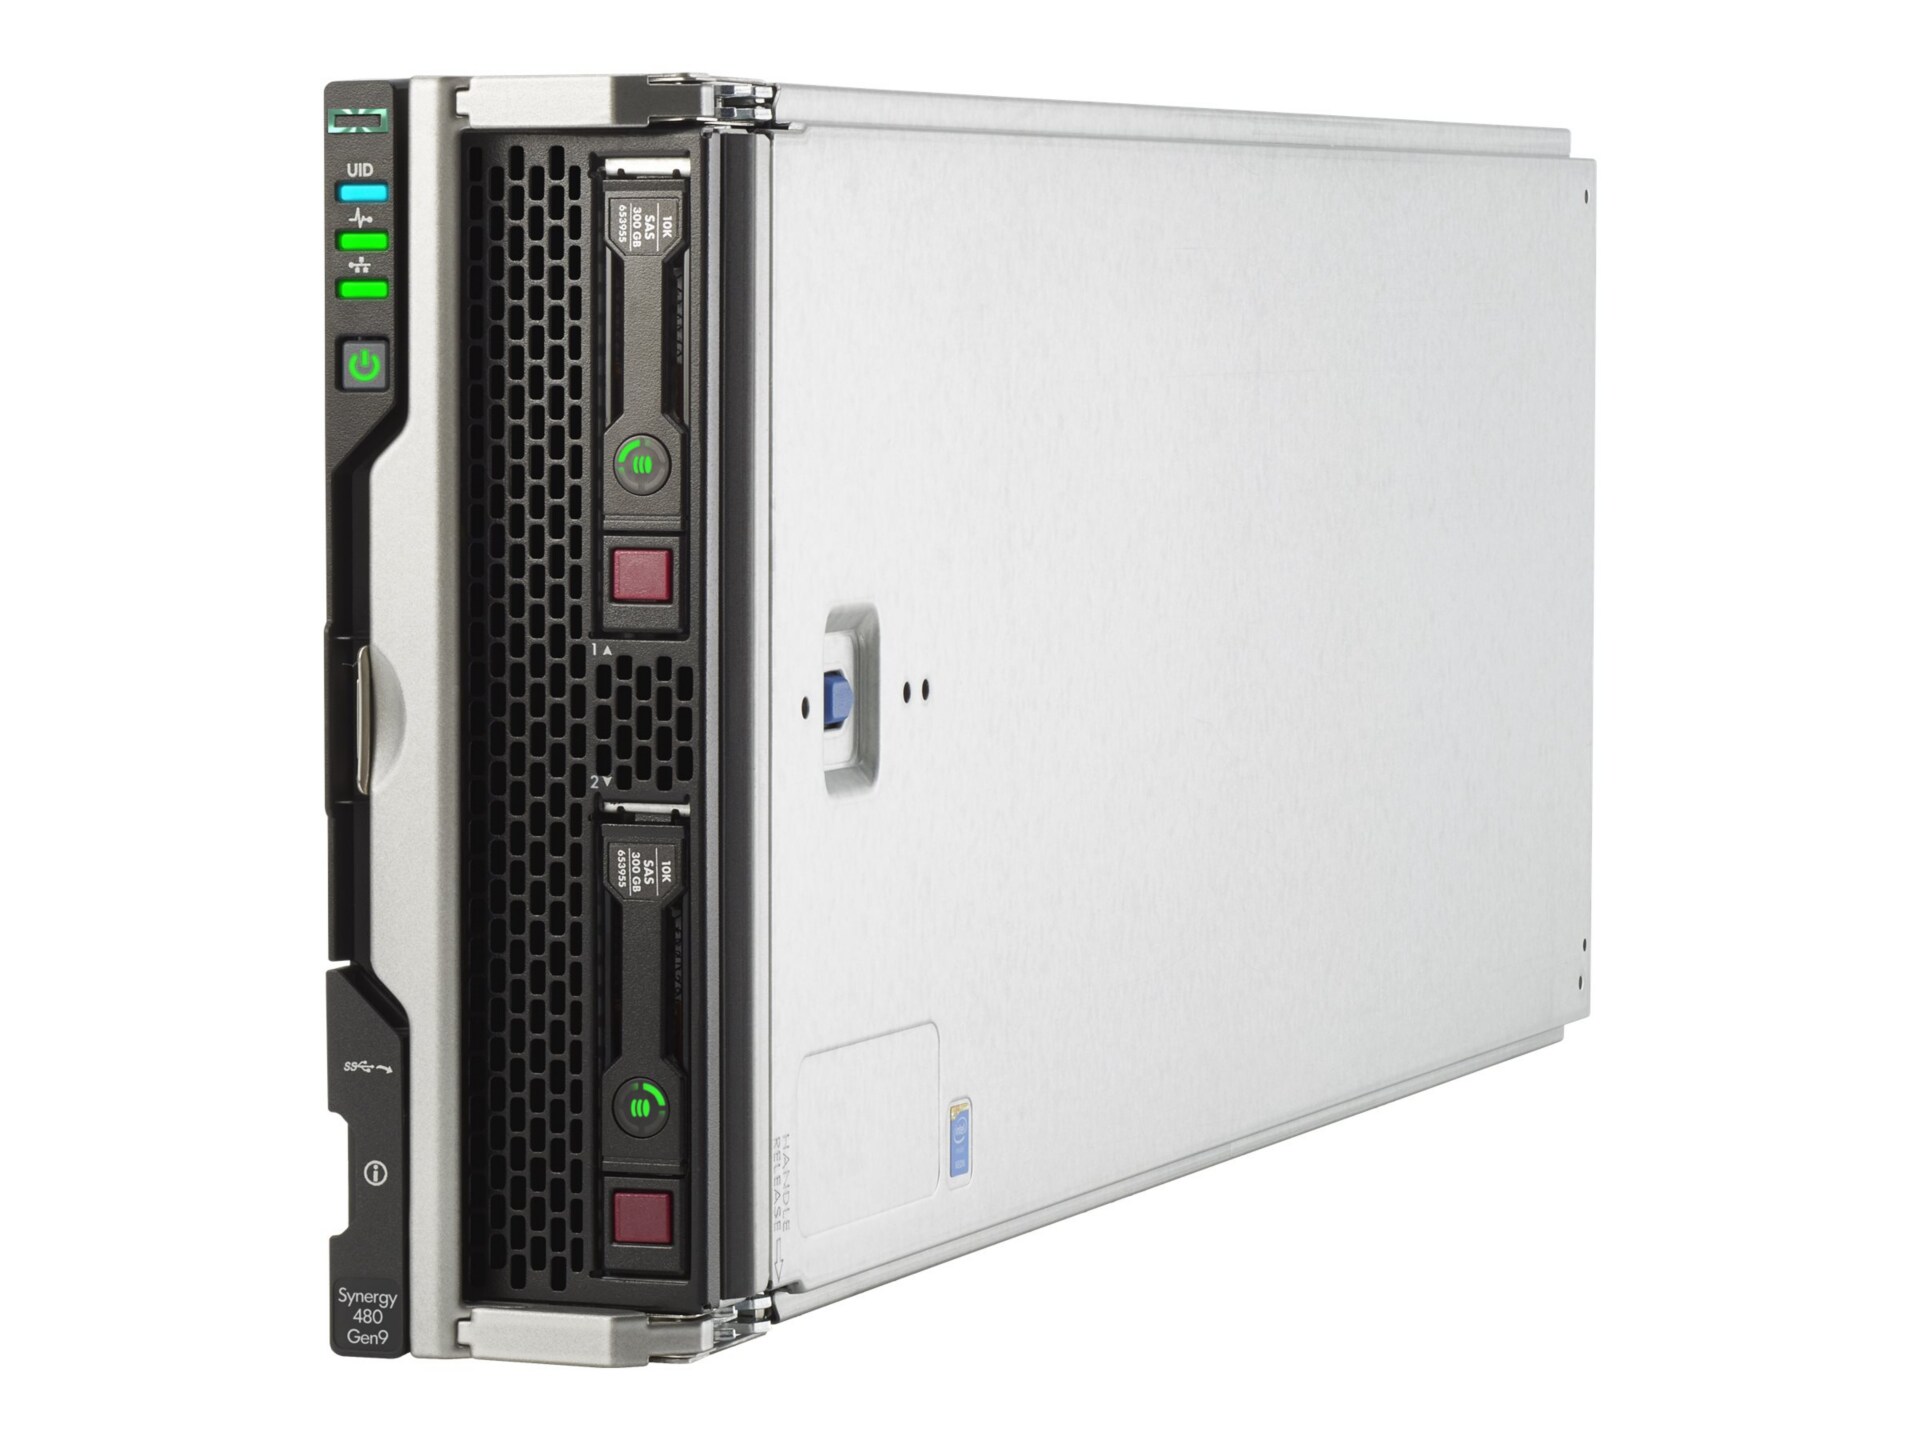 HPE Synergy 480 Gen9 Compute Module - blade - no CPU - 0 MB - with HPE Synergy D3940 Storage Module